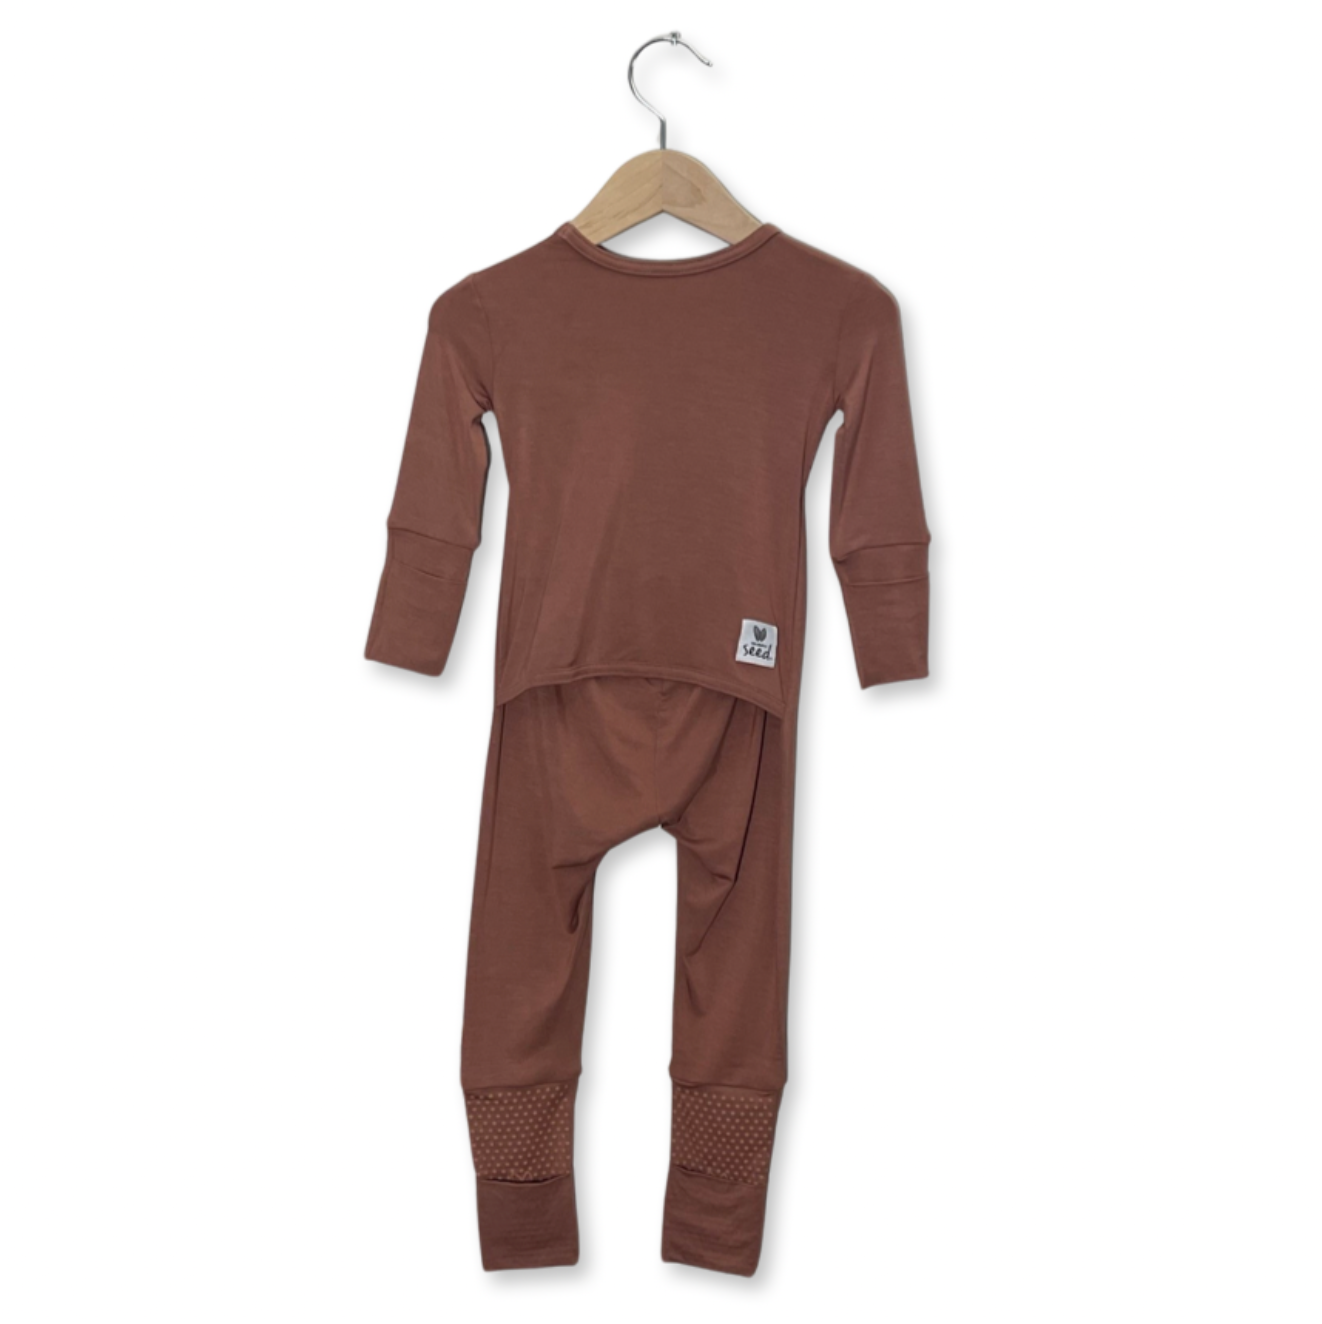 Red Rock Adaptive Tube Access with snaps Kid's Day to Night Romper